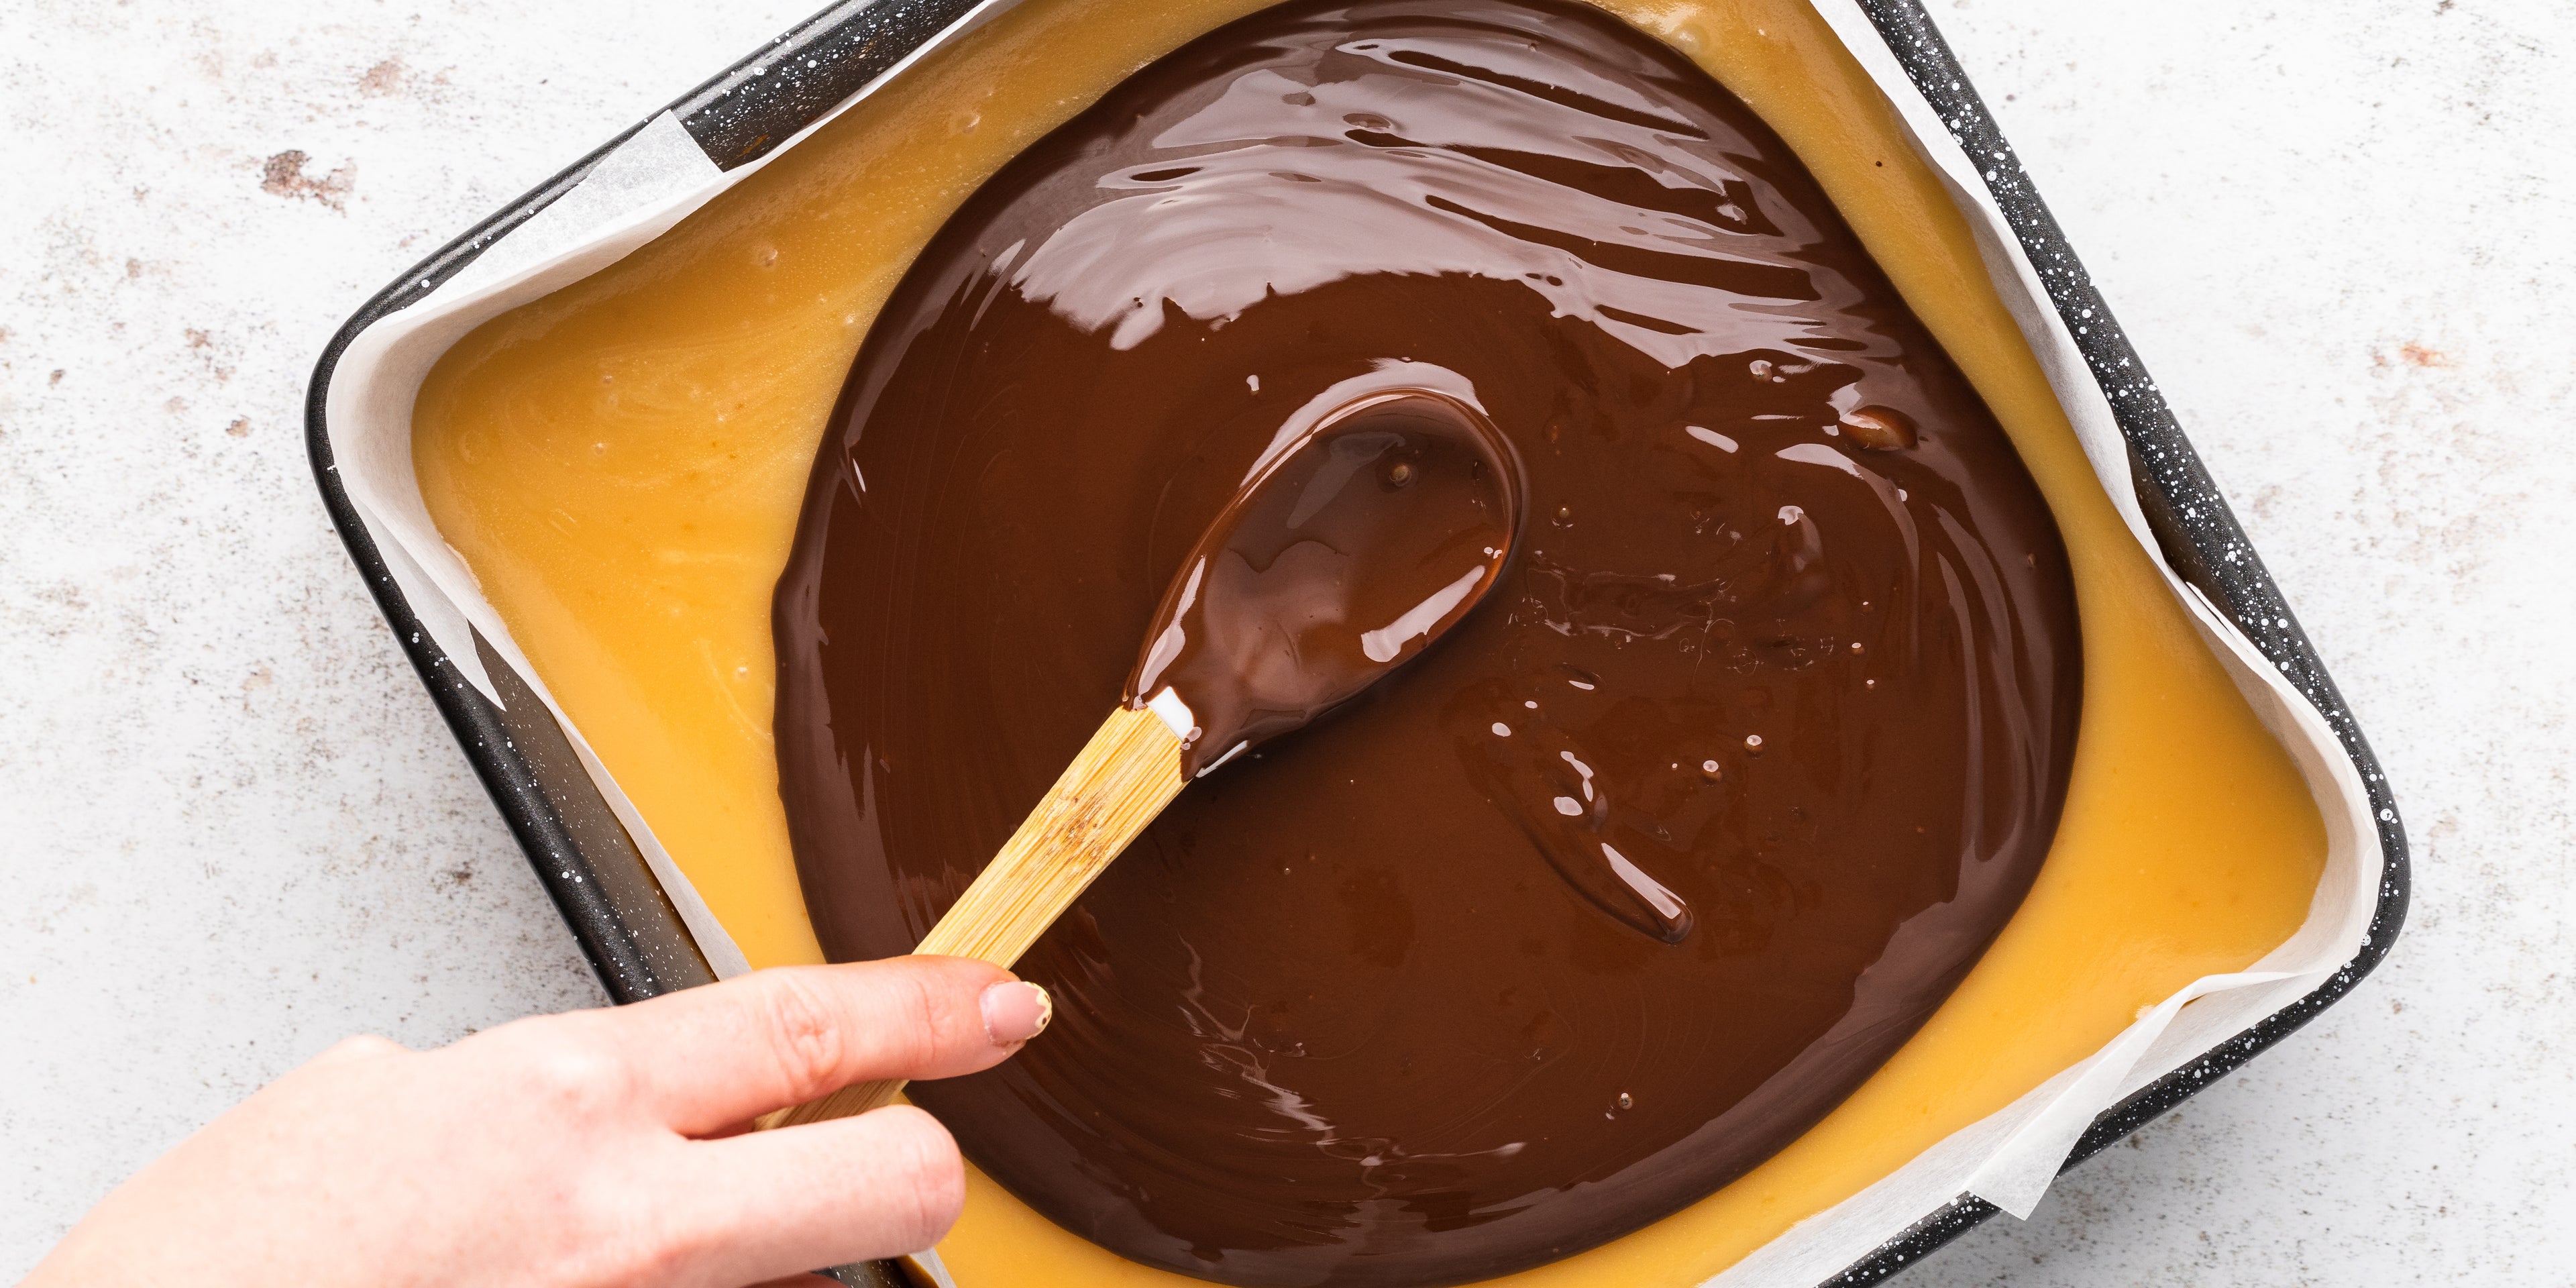 Chocolate being spread over the top of caramel in a square baking tin